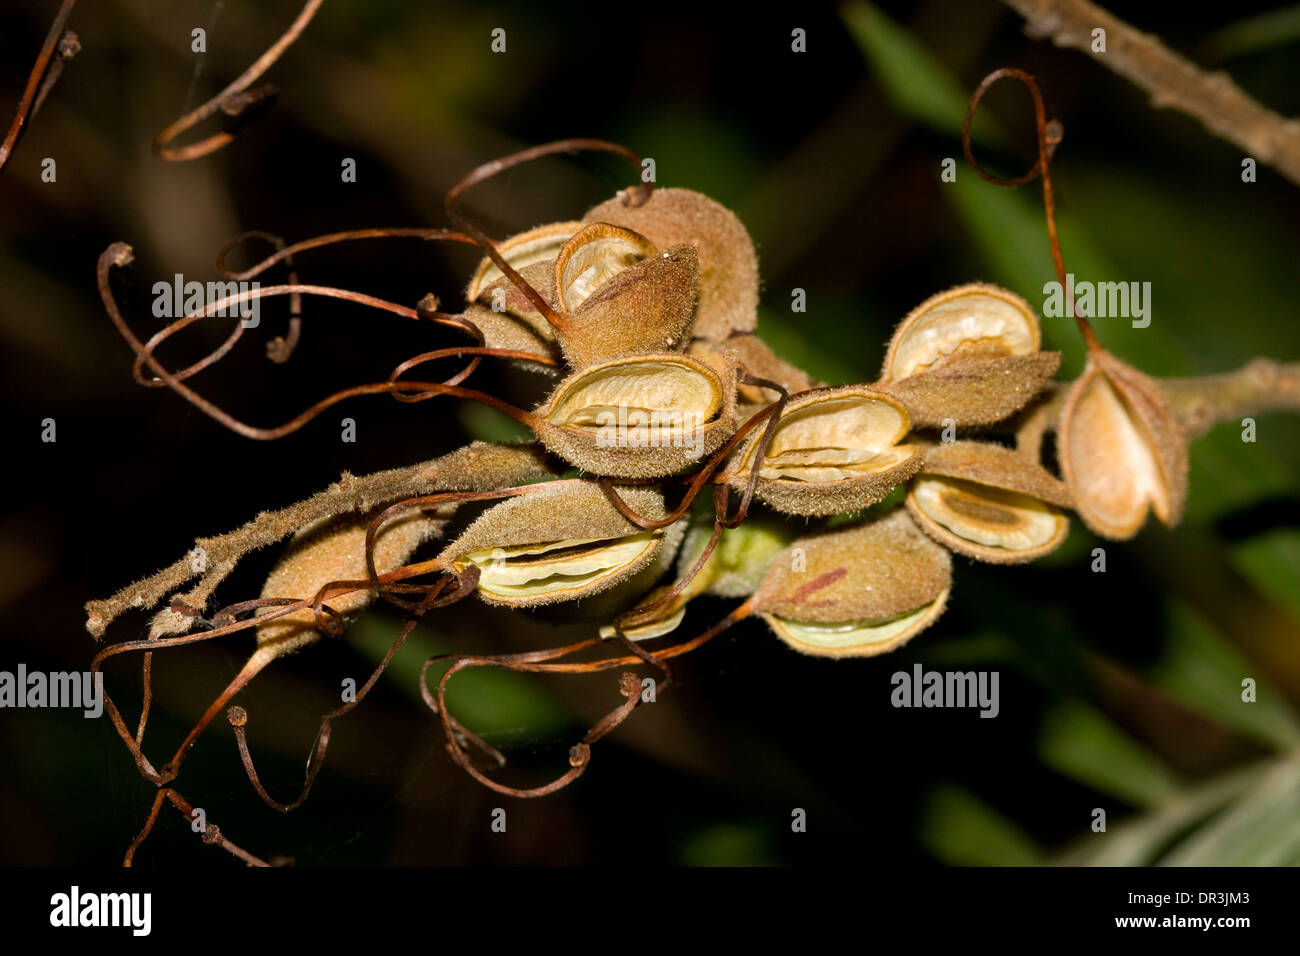 Cluster of Grevillea banksii seed pods - open to show seed inside, against dark background Stock Photo